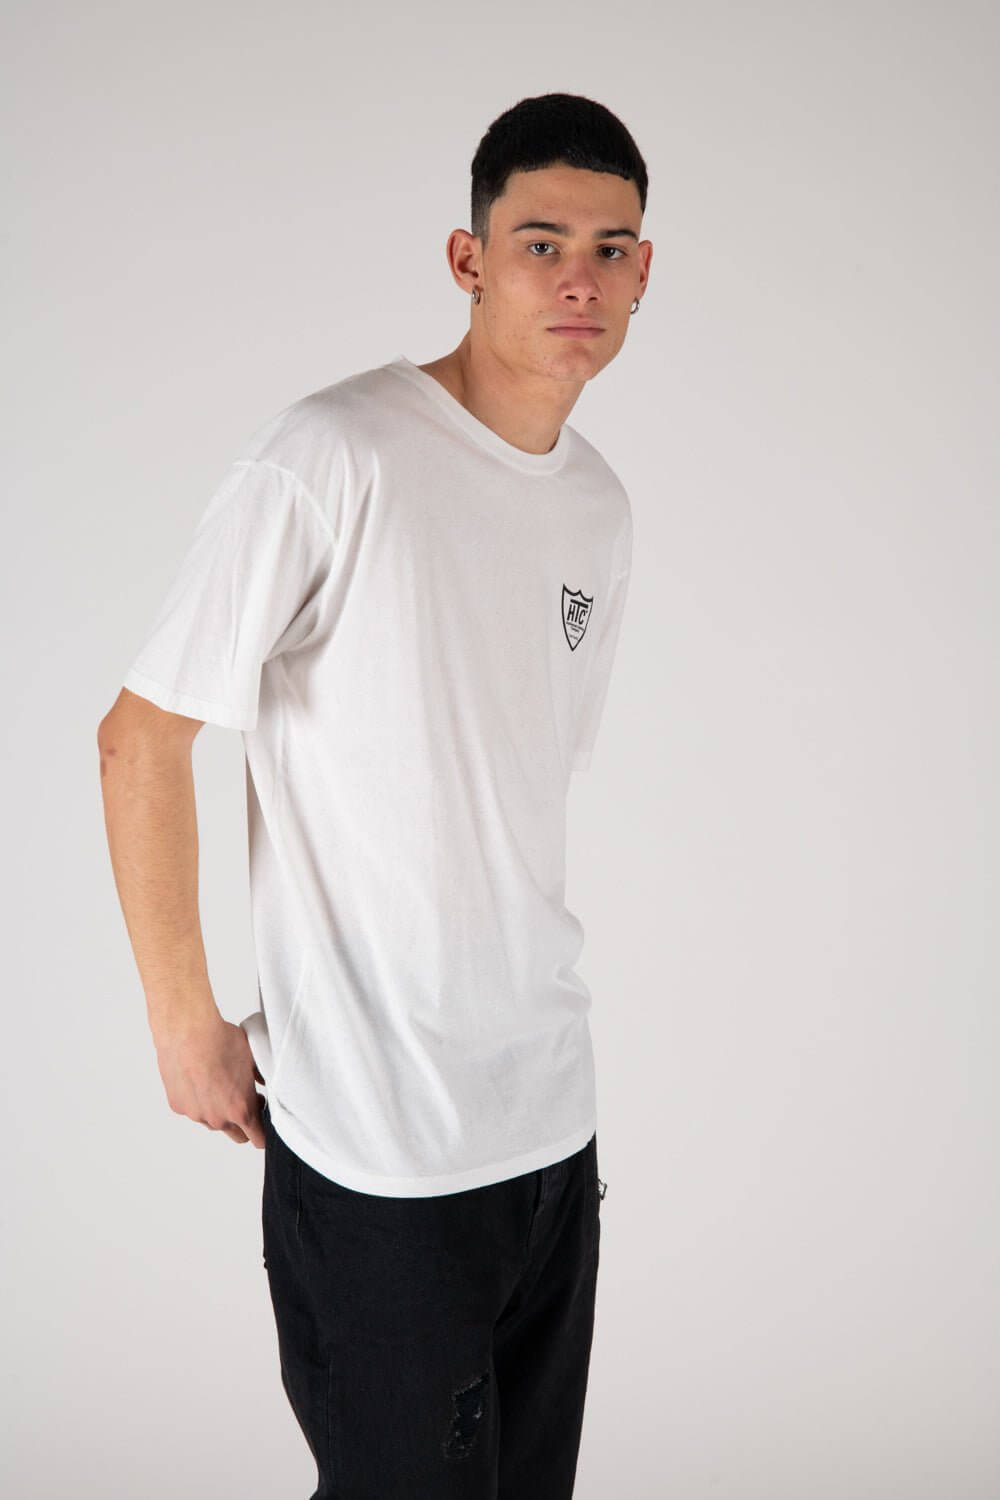 HTC LIL LOGO Regular fit t-shirt with printed mini-logo on the front. Composition: 100% Cotton HTC LOS ANGELES